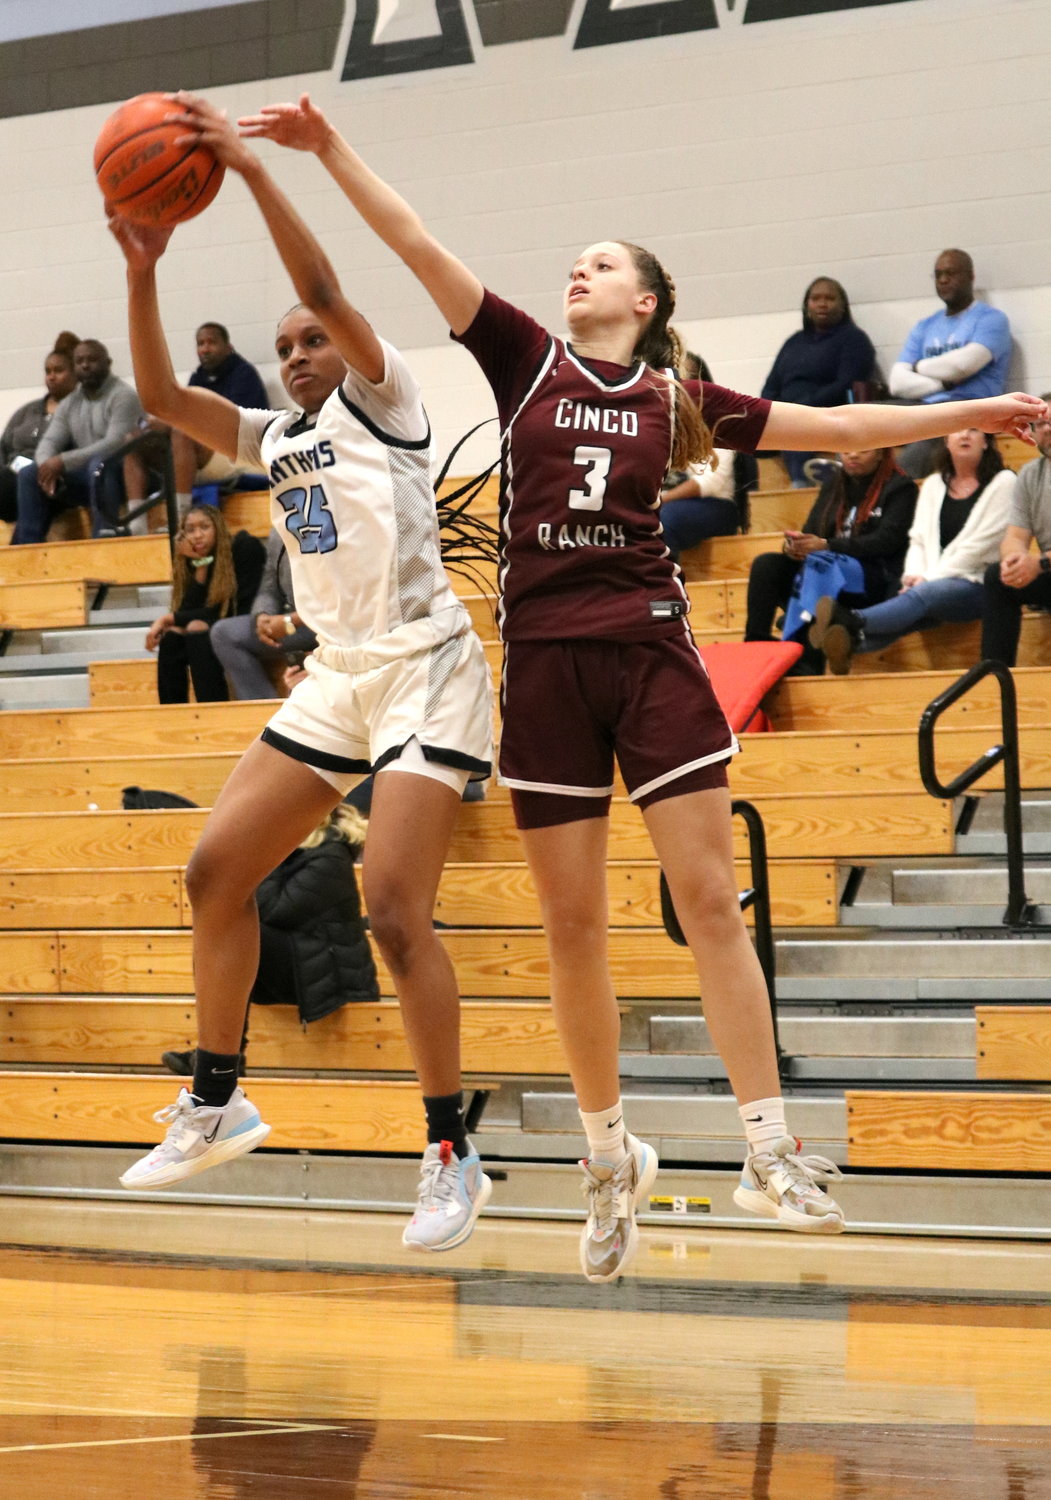 Tiera Hall pulls down a rebound during Friday's game between Cinco Ranch and Paetow at the Paetow gym.